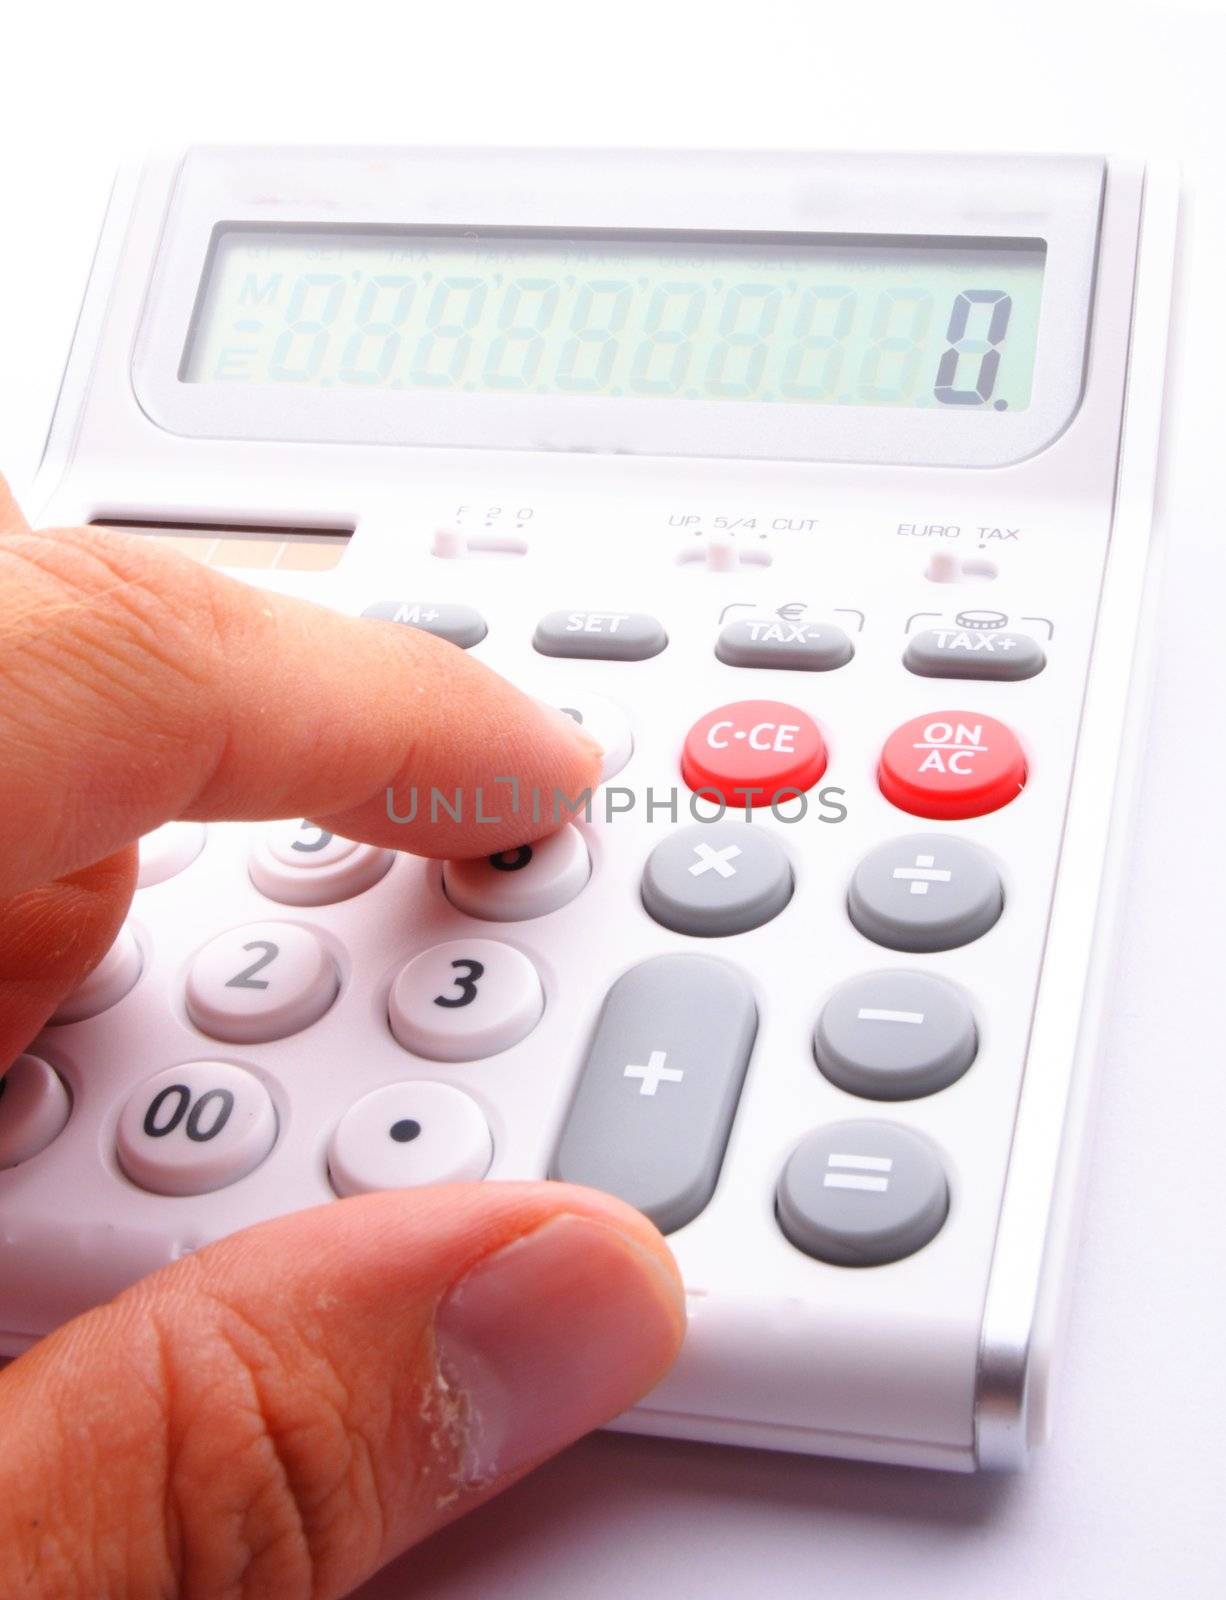 adding up figures concept with modern white calculator in office